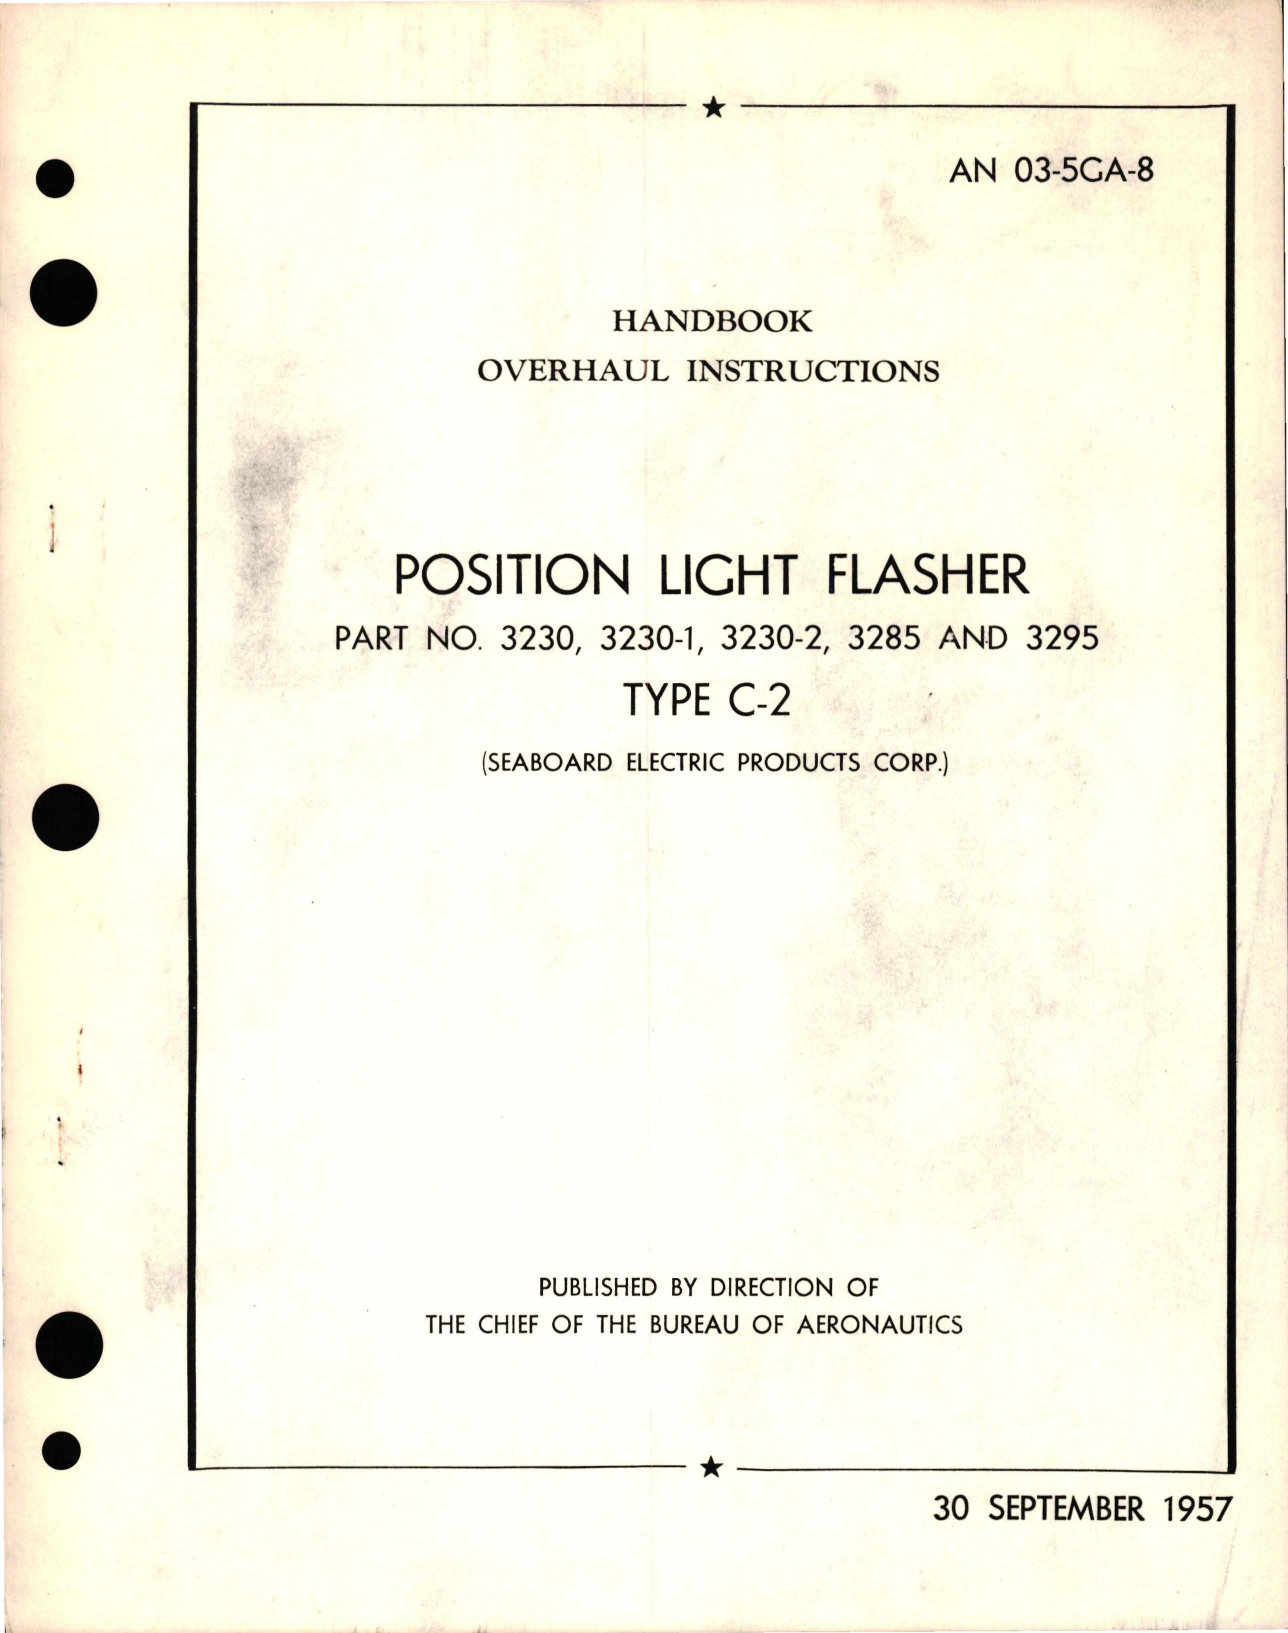 Sample page 1 from AirCorps Library document: Overhaul Instructions for Position Light Flasher - Type C-2, Parts 3230, 3230-1, 3230-2, 3285, and 3295